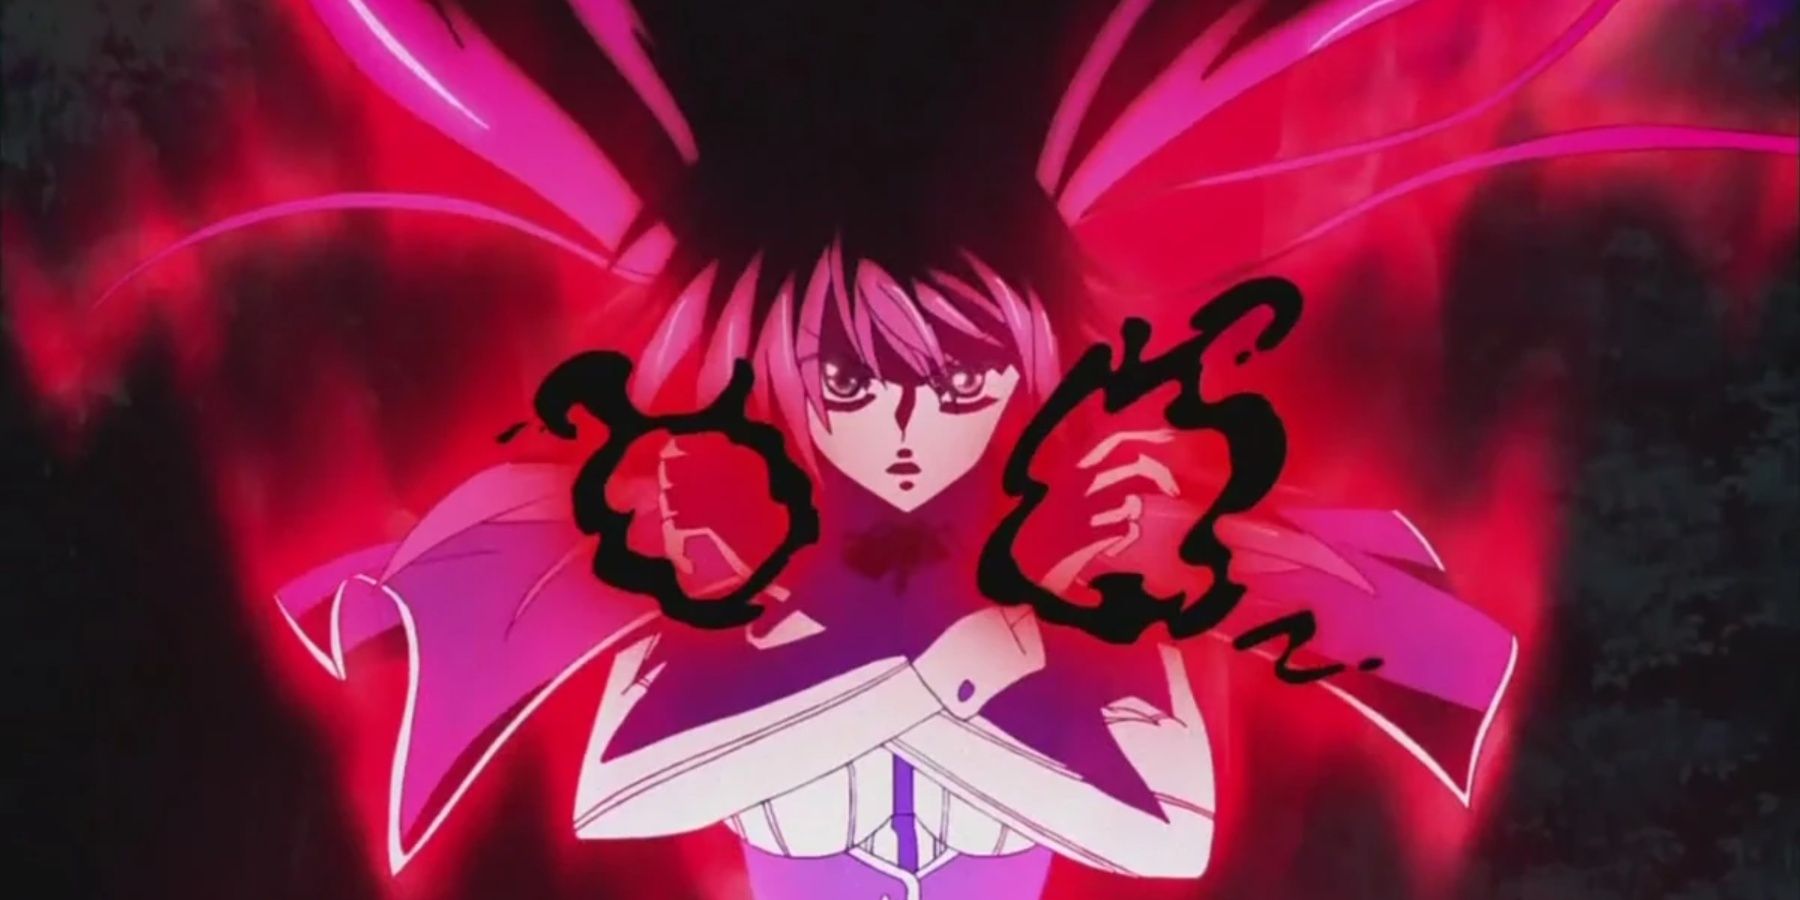 Rias Gremory using her Destruction Magic in High School DxD